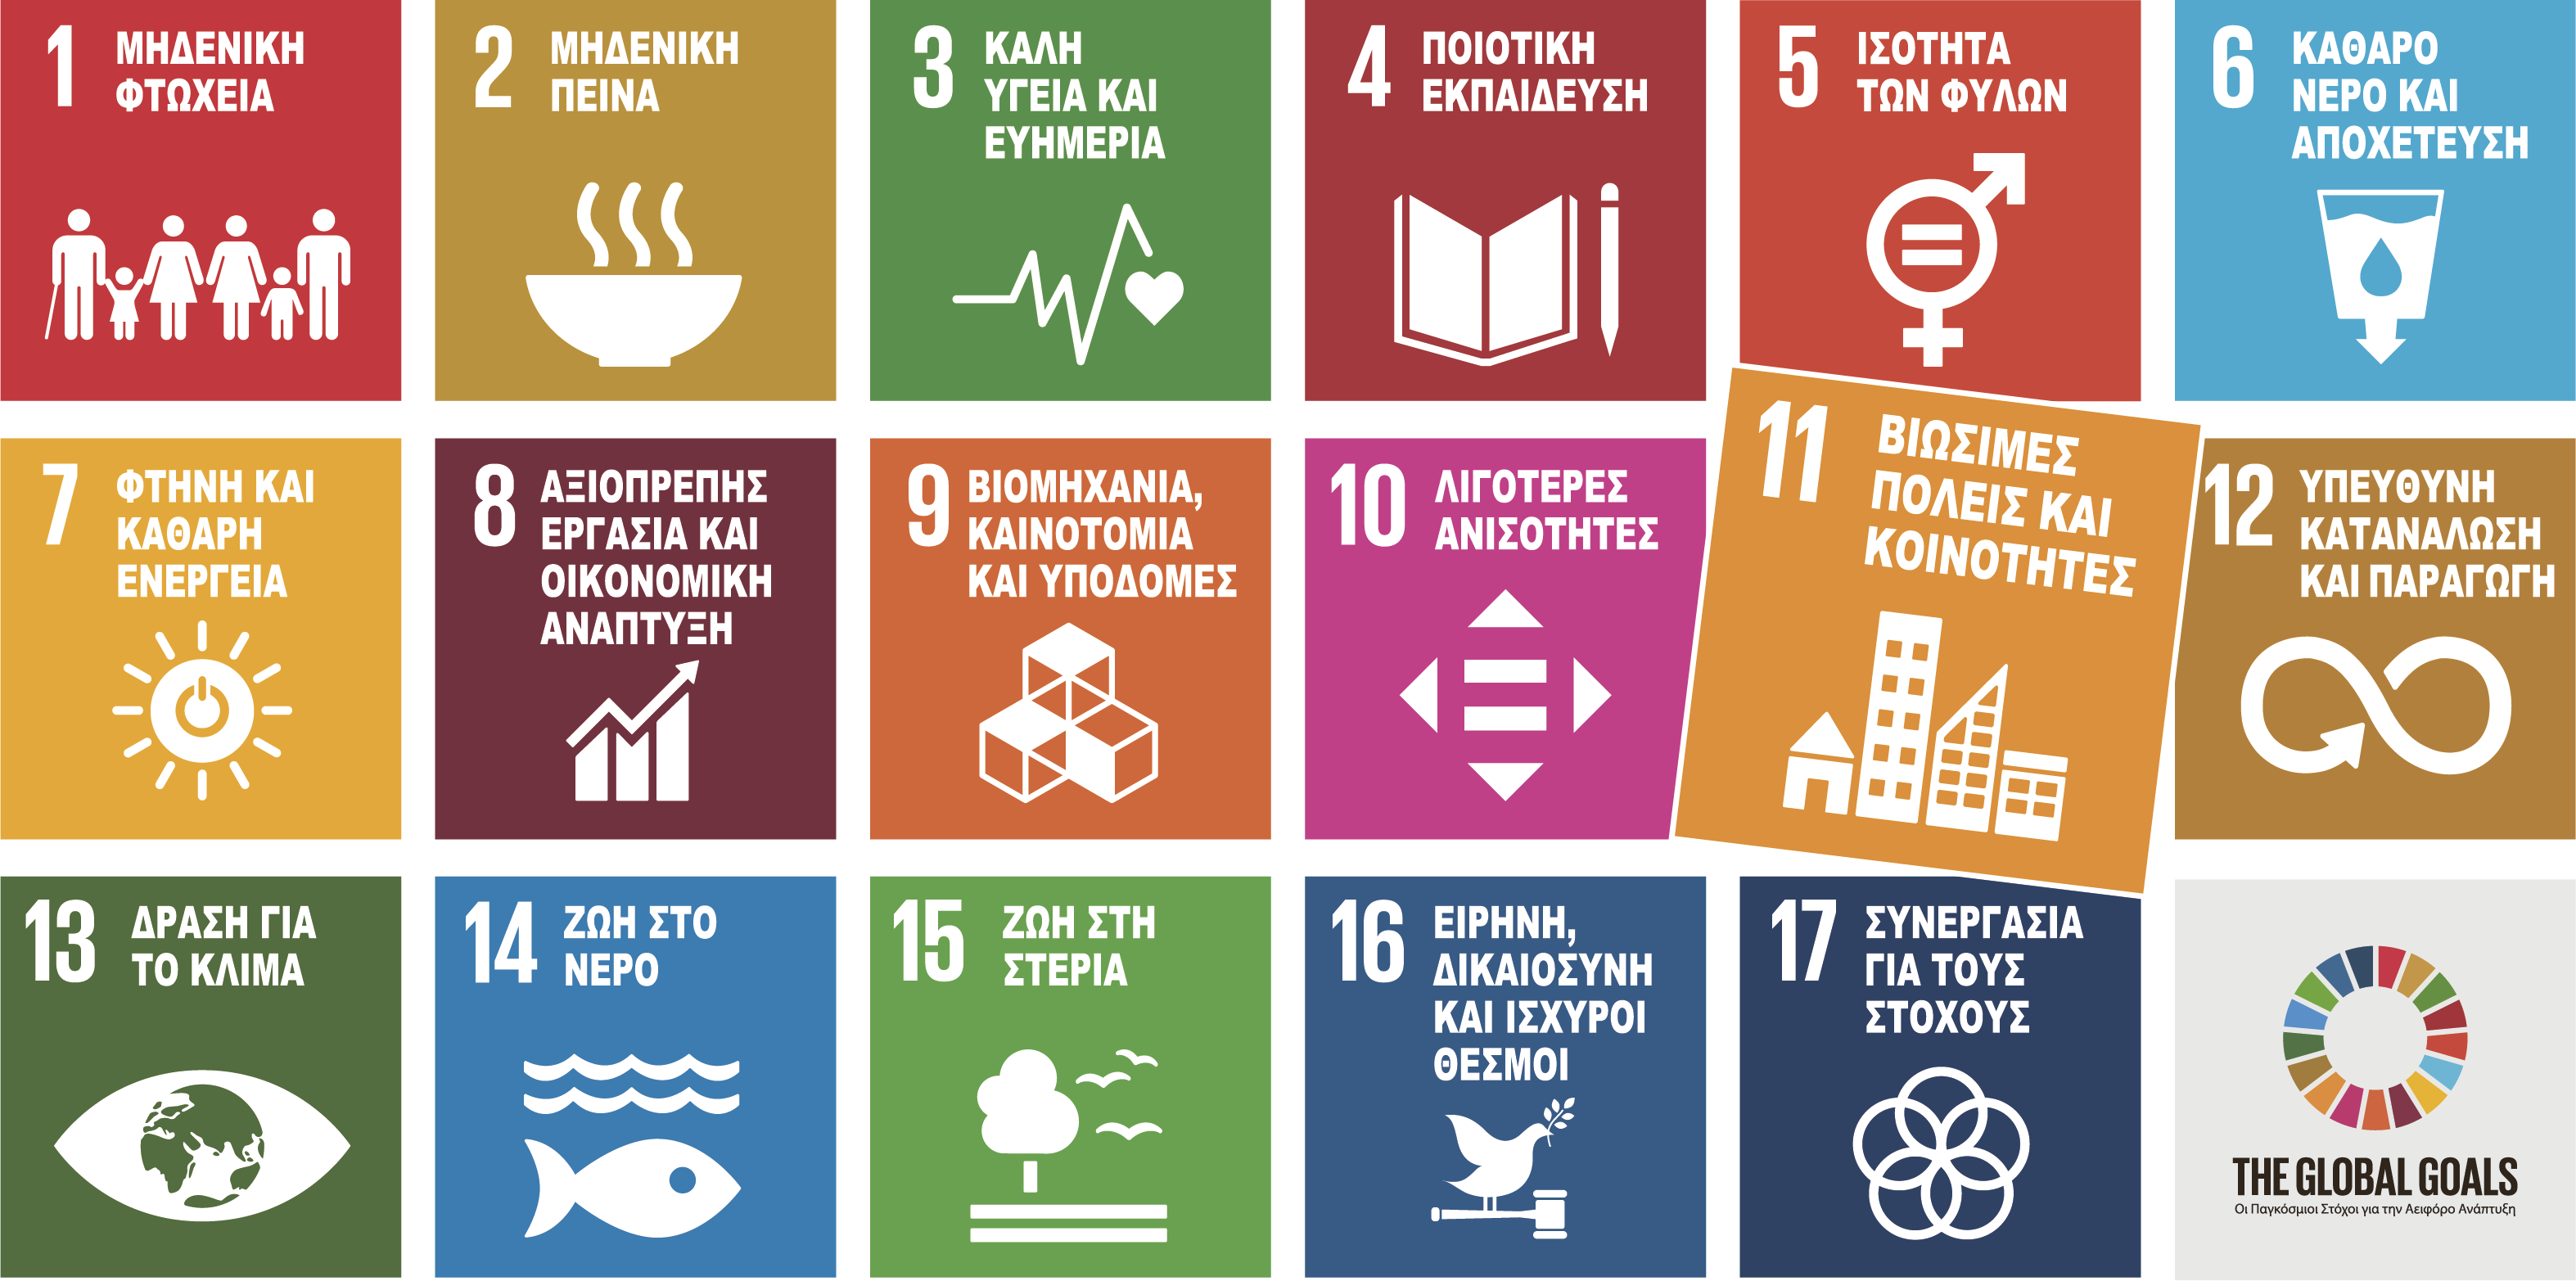 Global Goals for sustainability